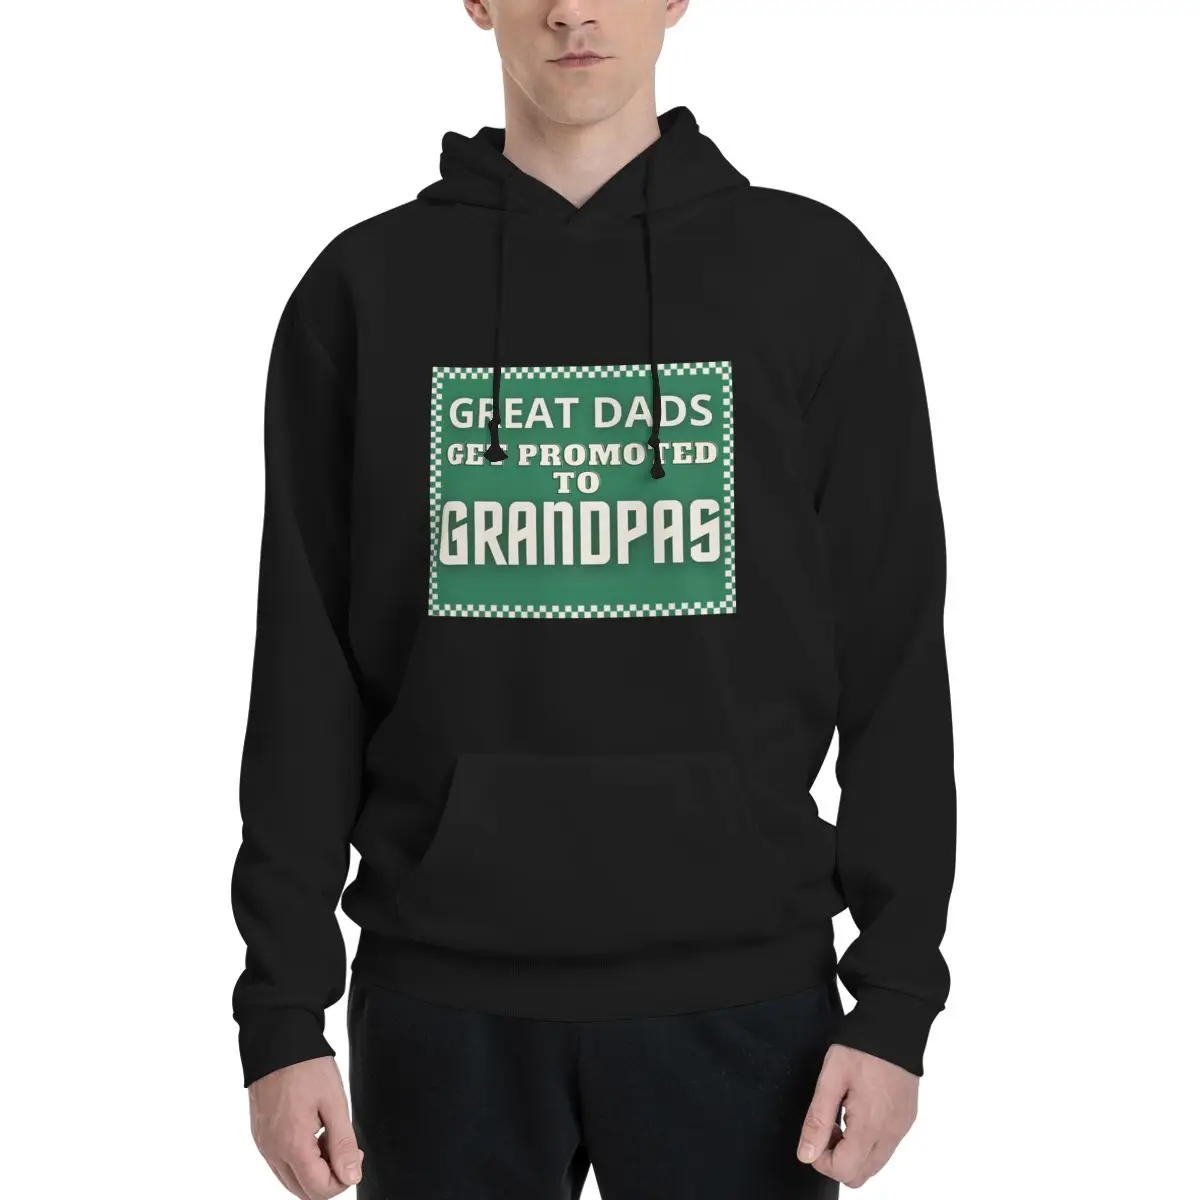 

Great Dads Get Promoted To Grandpas I Great Polyester Hoodie Men's Women's Sweater Size XXS-3XL